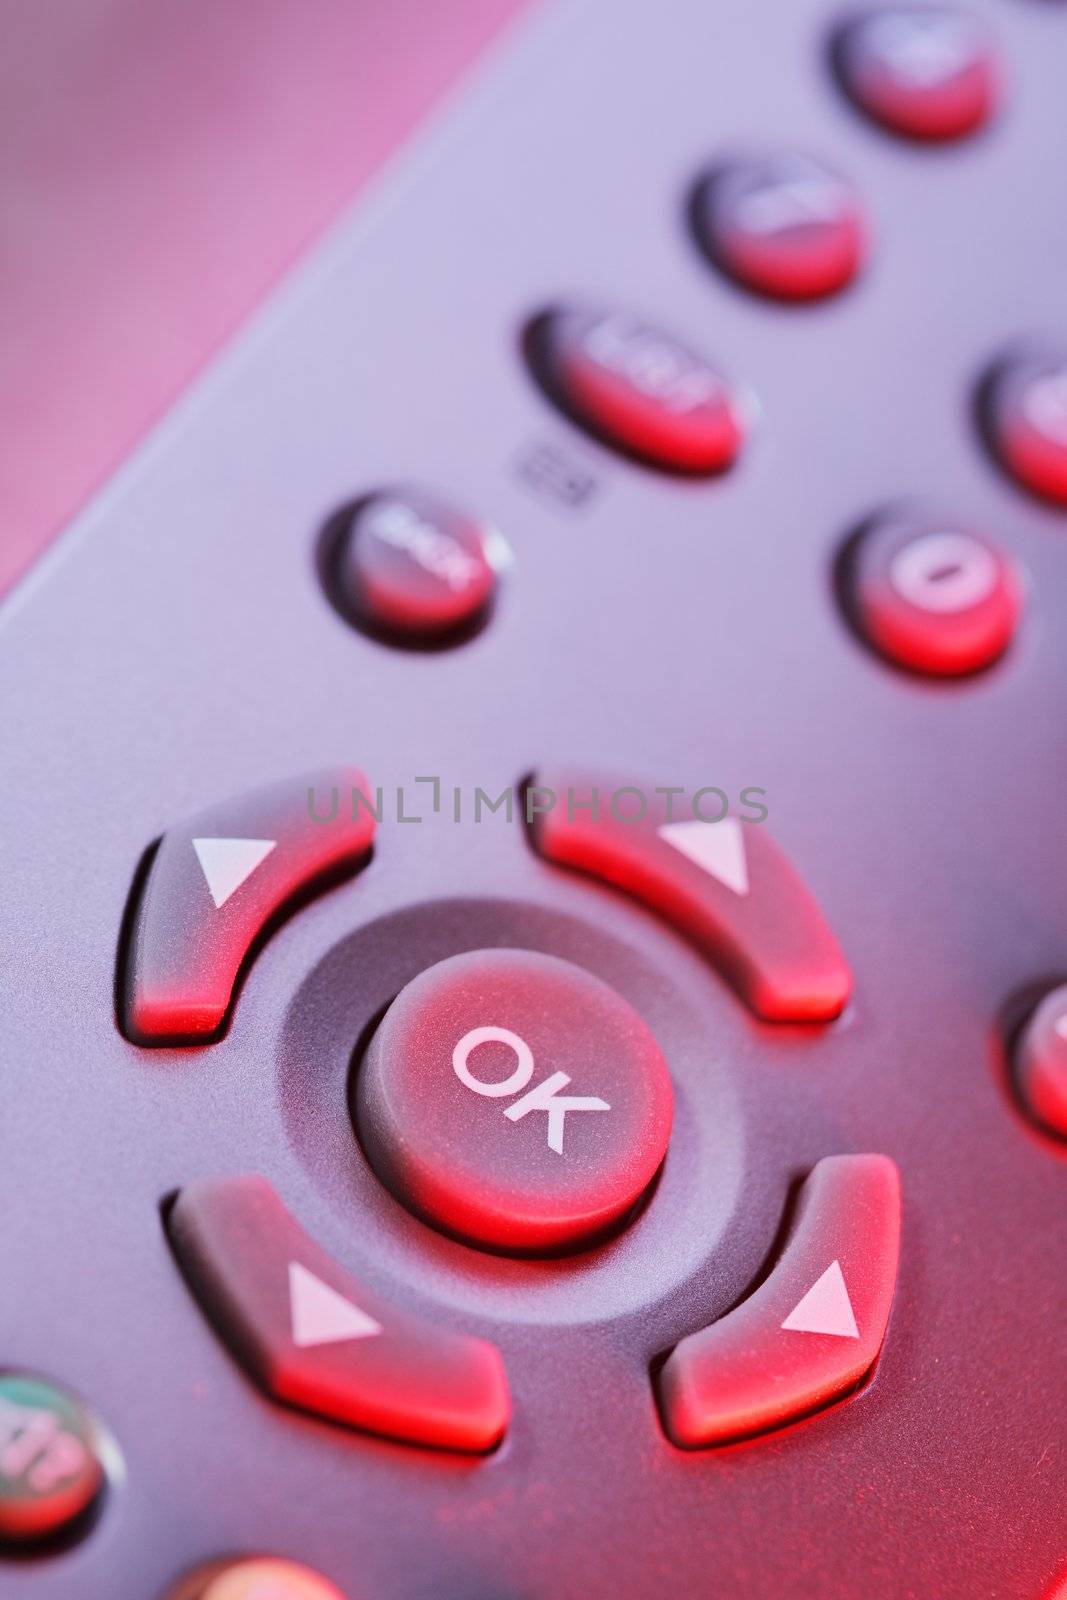 Remote control by Stocksnapper